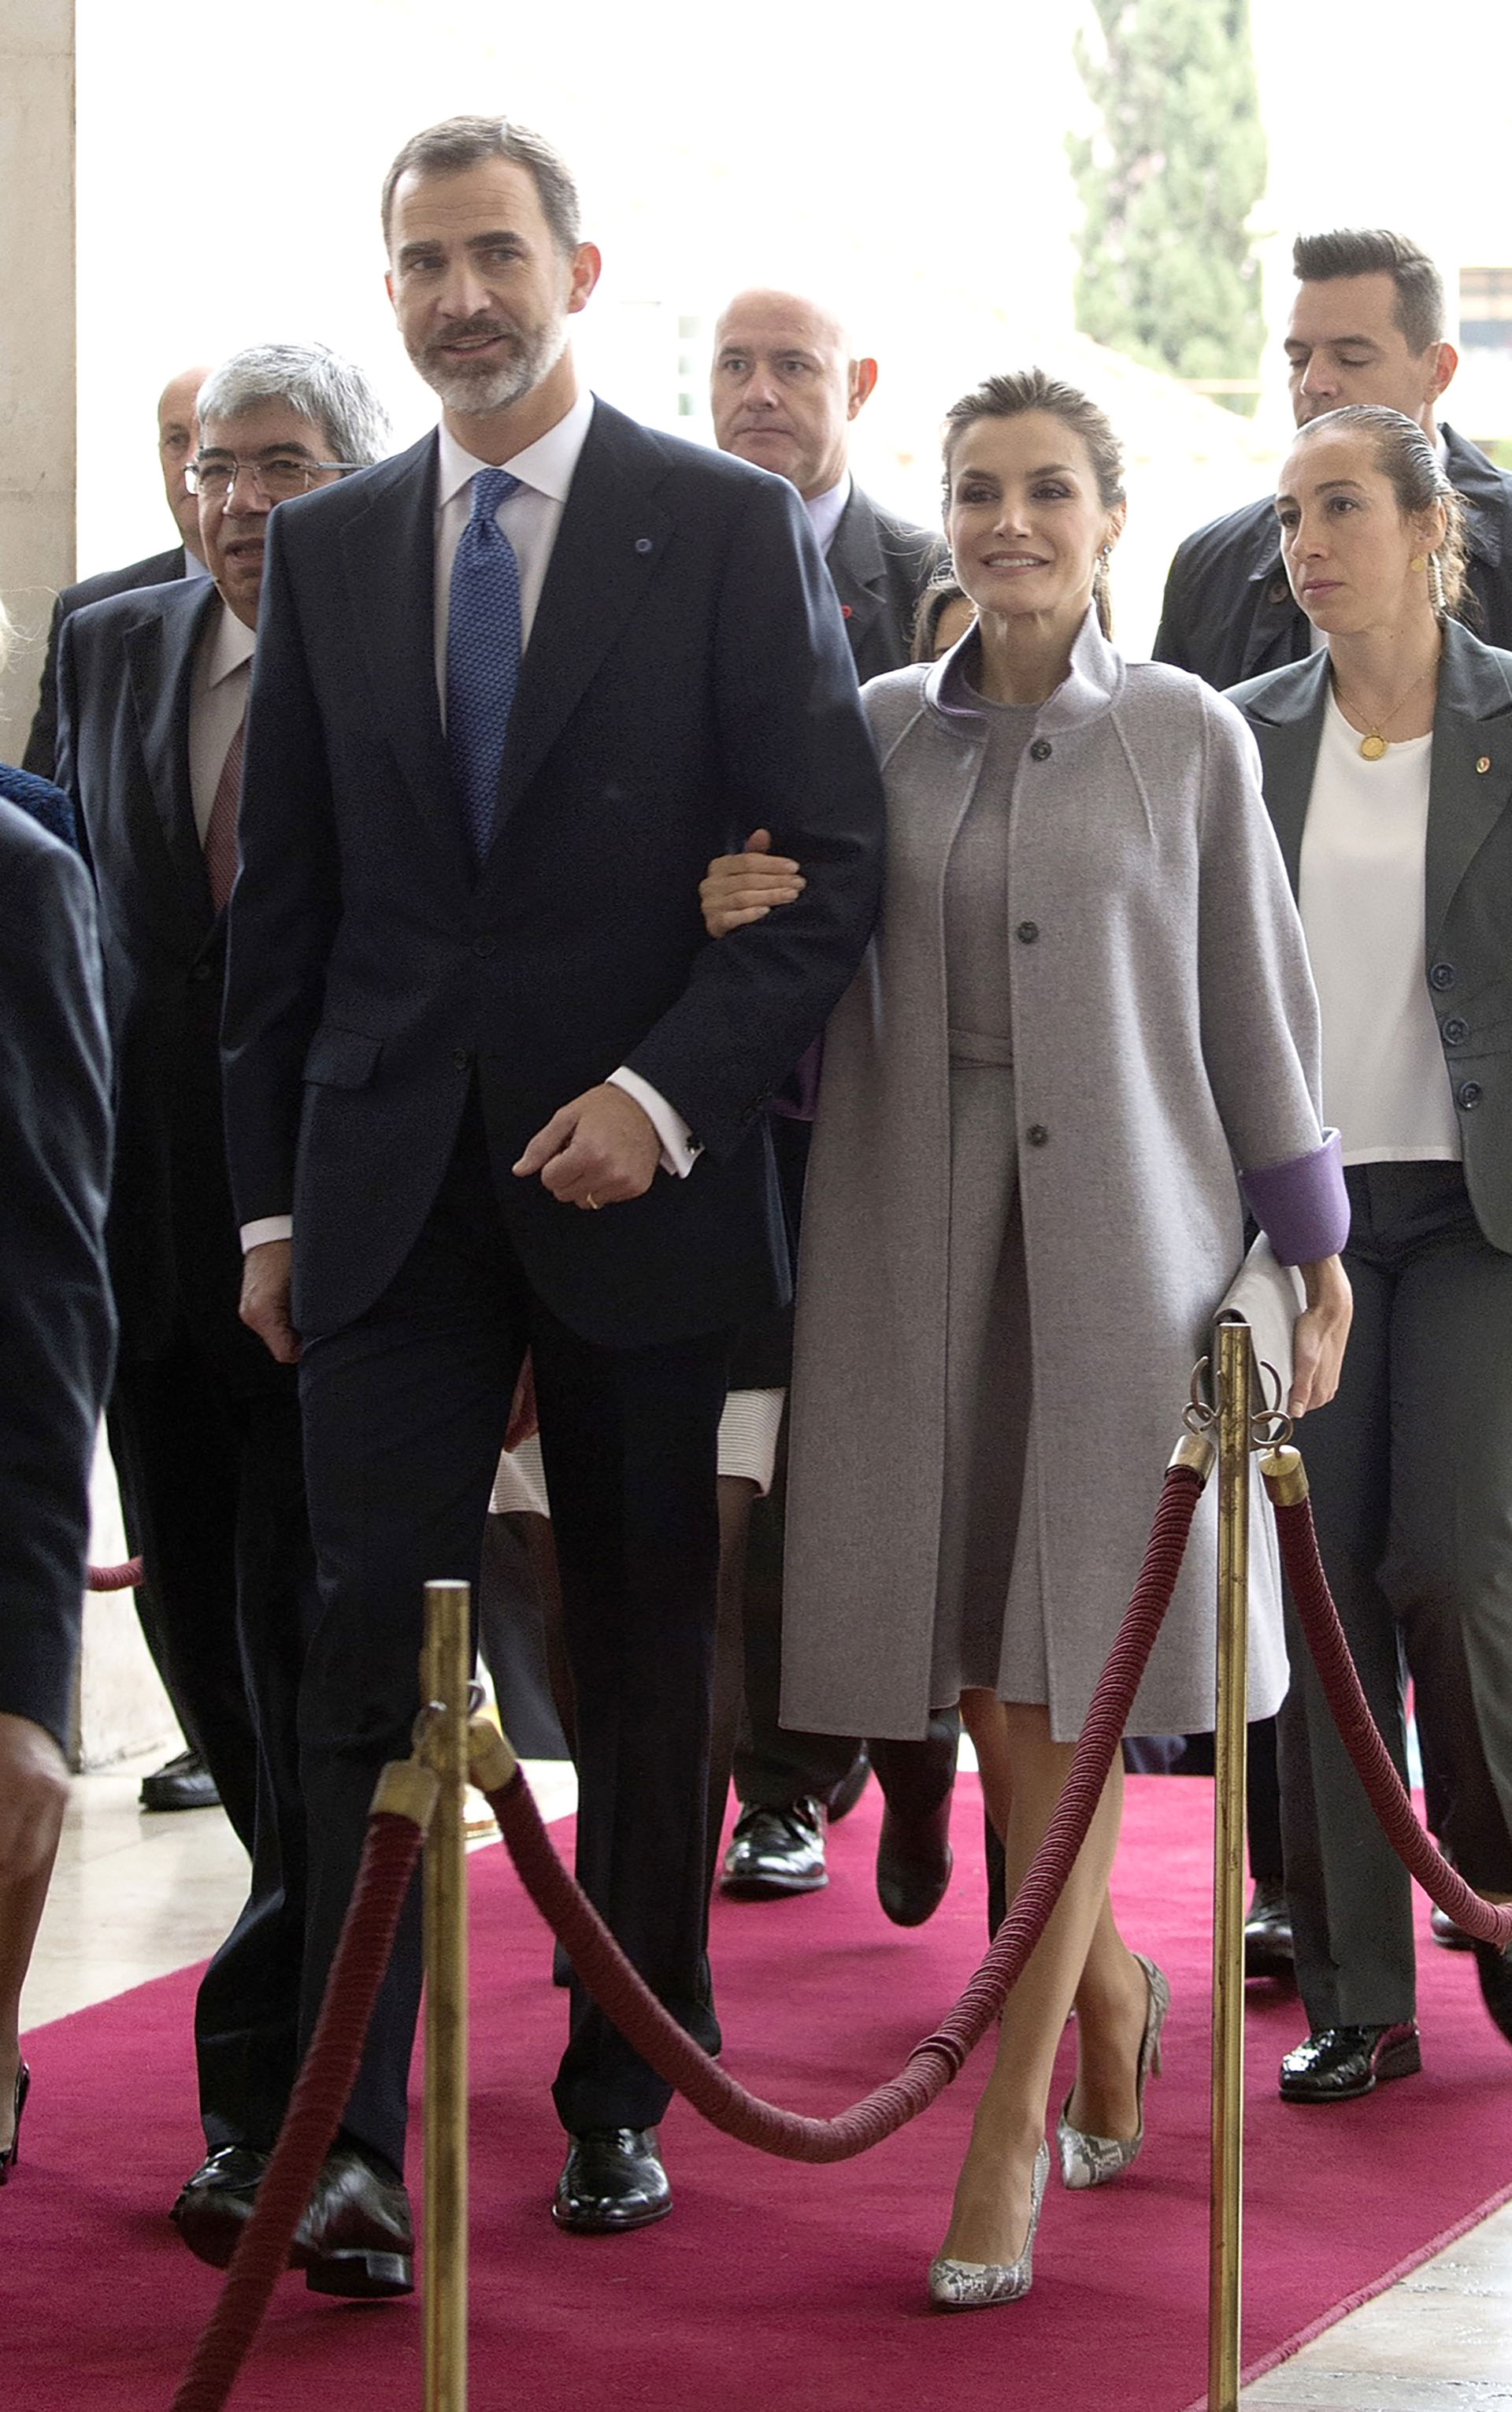 King Felipe VI of Spain visit National Assembly at Palacio de Sao Bento during Official Visit to Portugal, day 3 on November 30, in Lisbon, Portugal